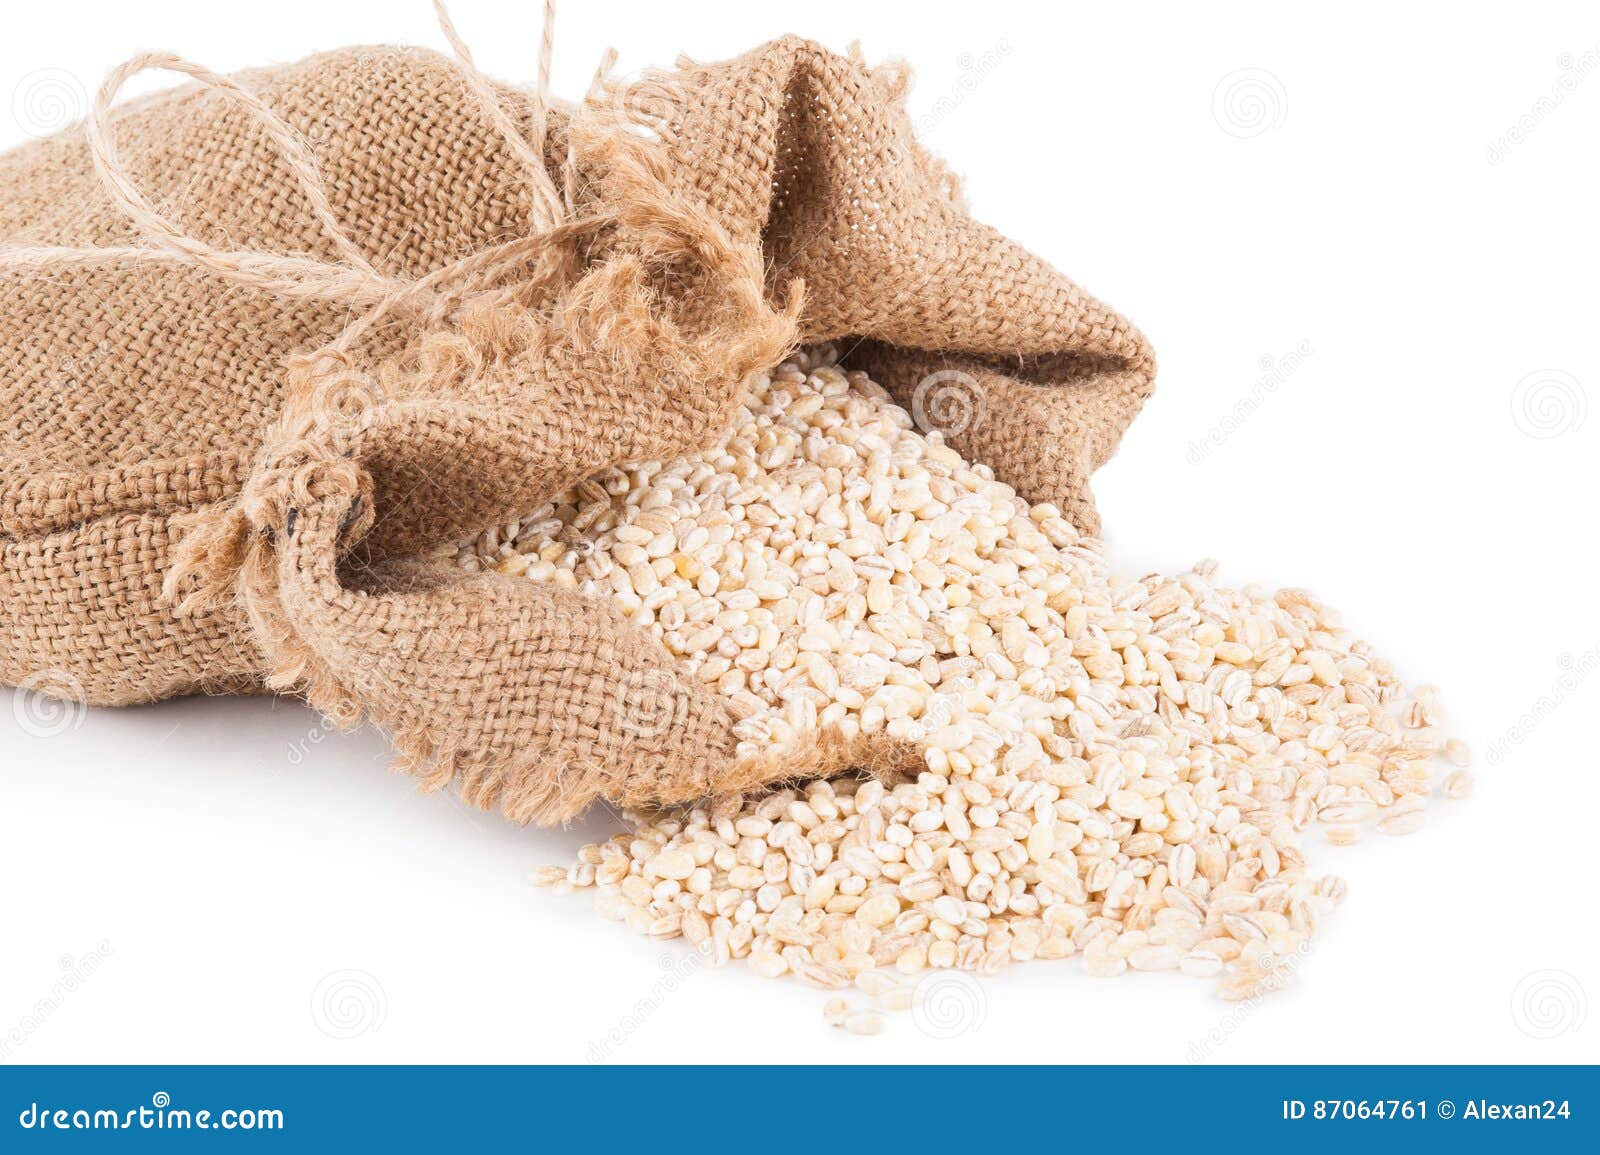 Download Bag With Pearl Barley Stock Image Image Of Cereal Organic 87064761 Yellowimages Mockups